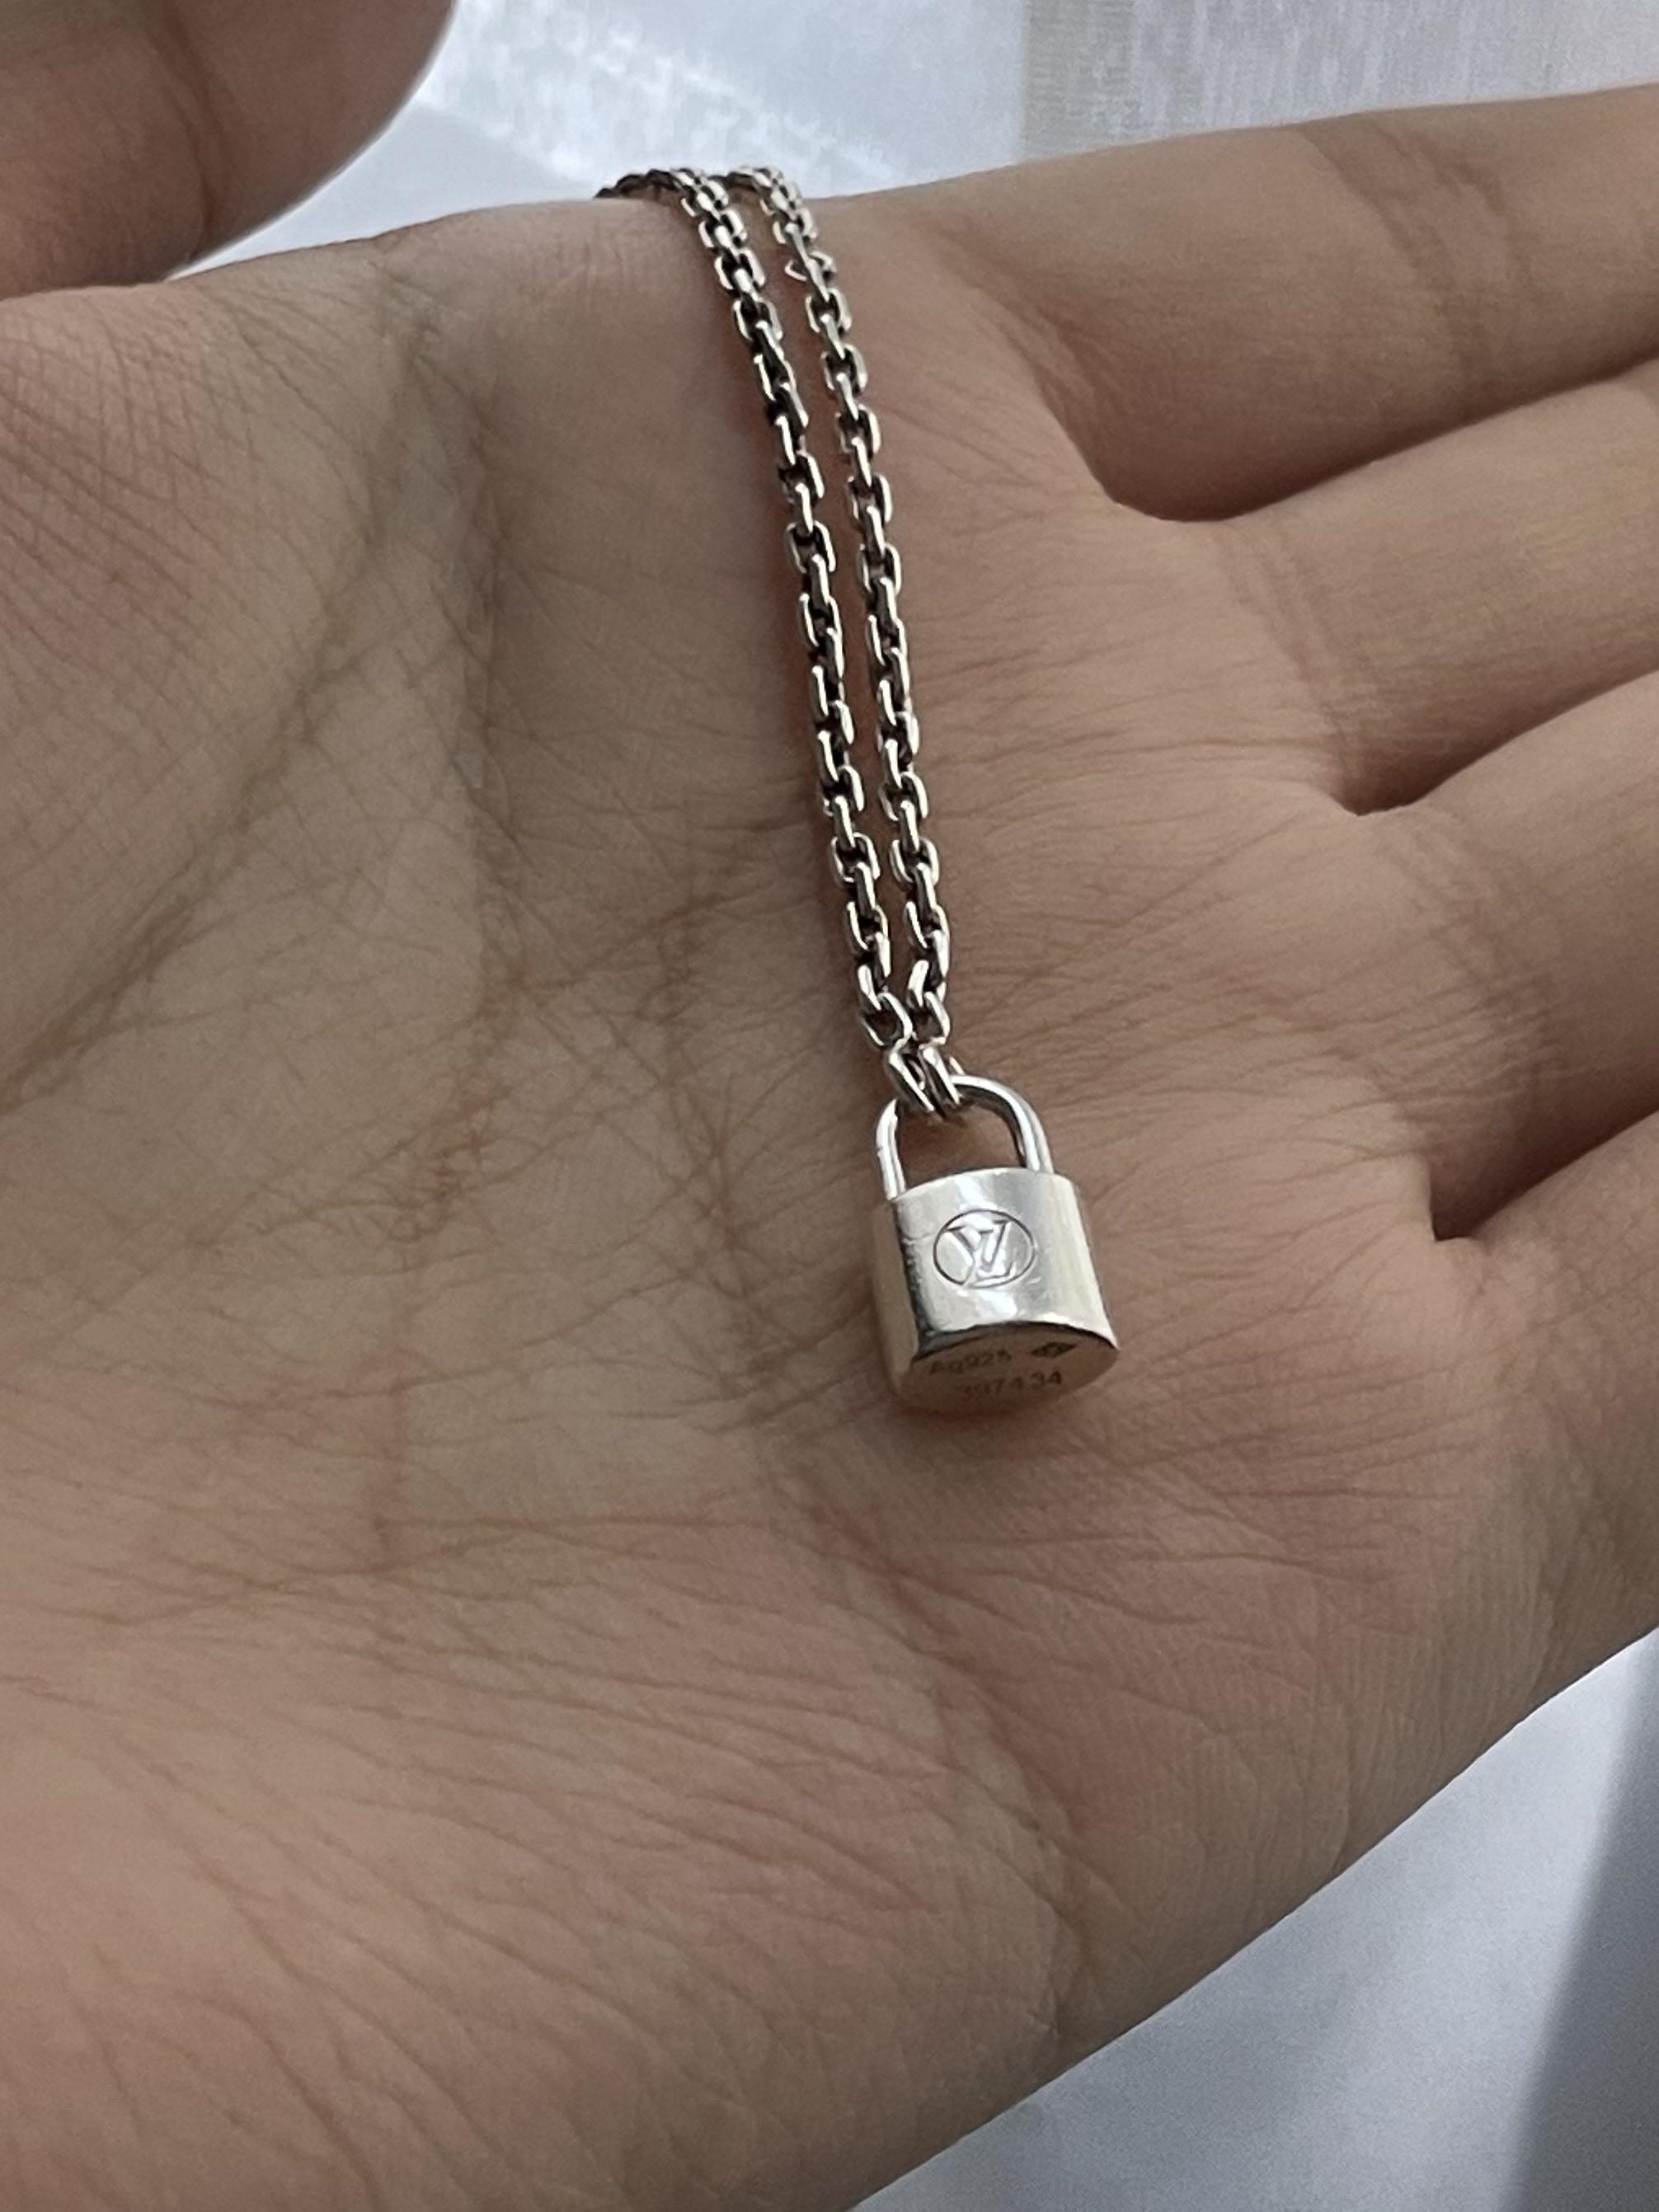 LV unicef SILVER LOCKIT Necklace, Luxury, Accessories on Carousell